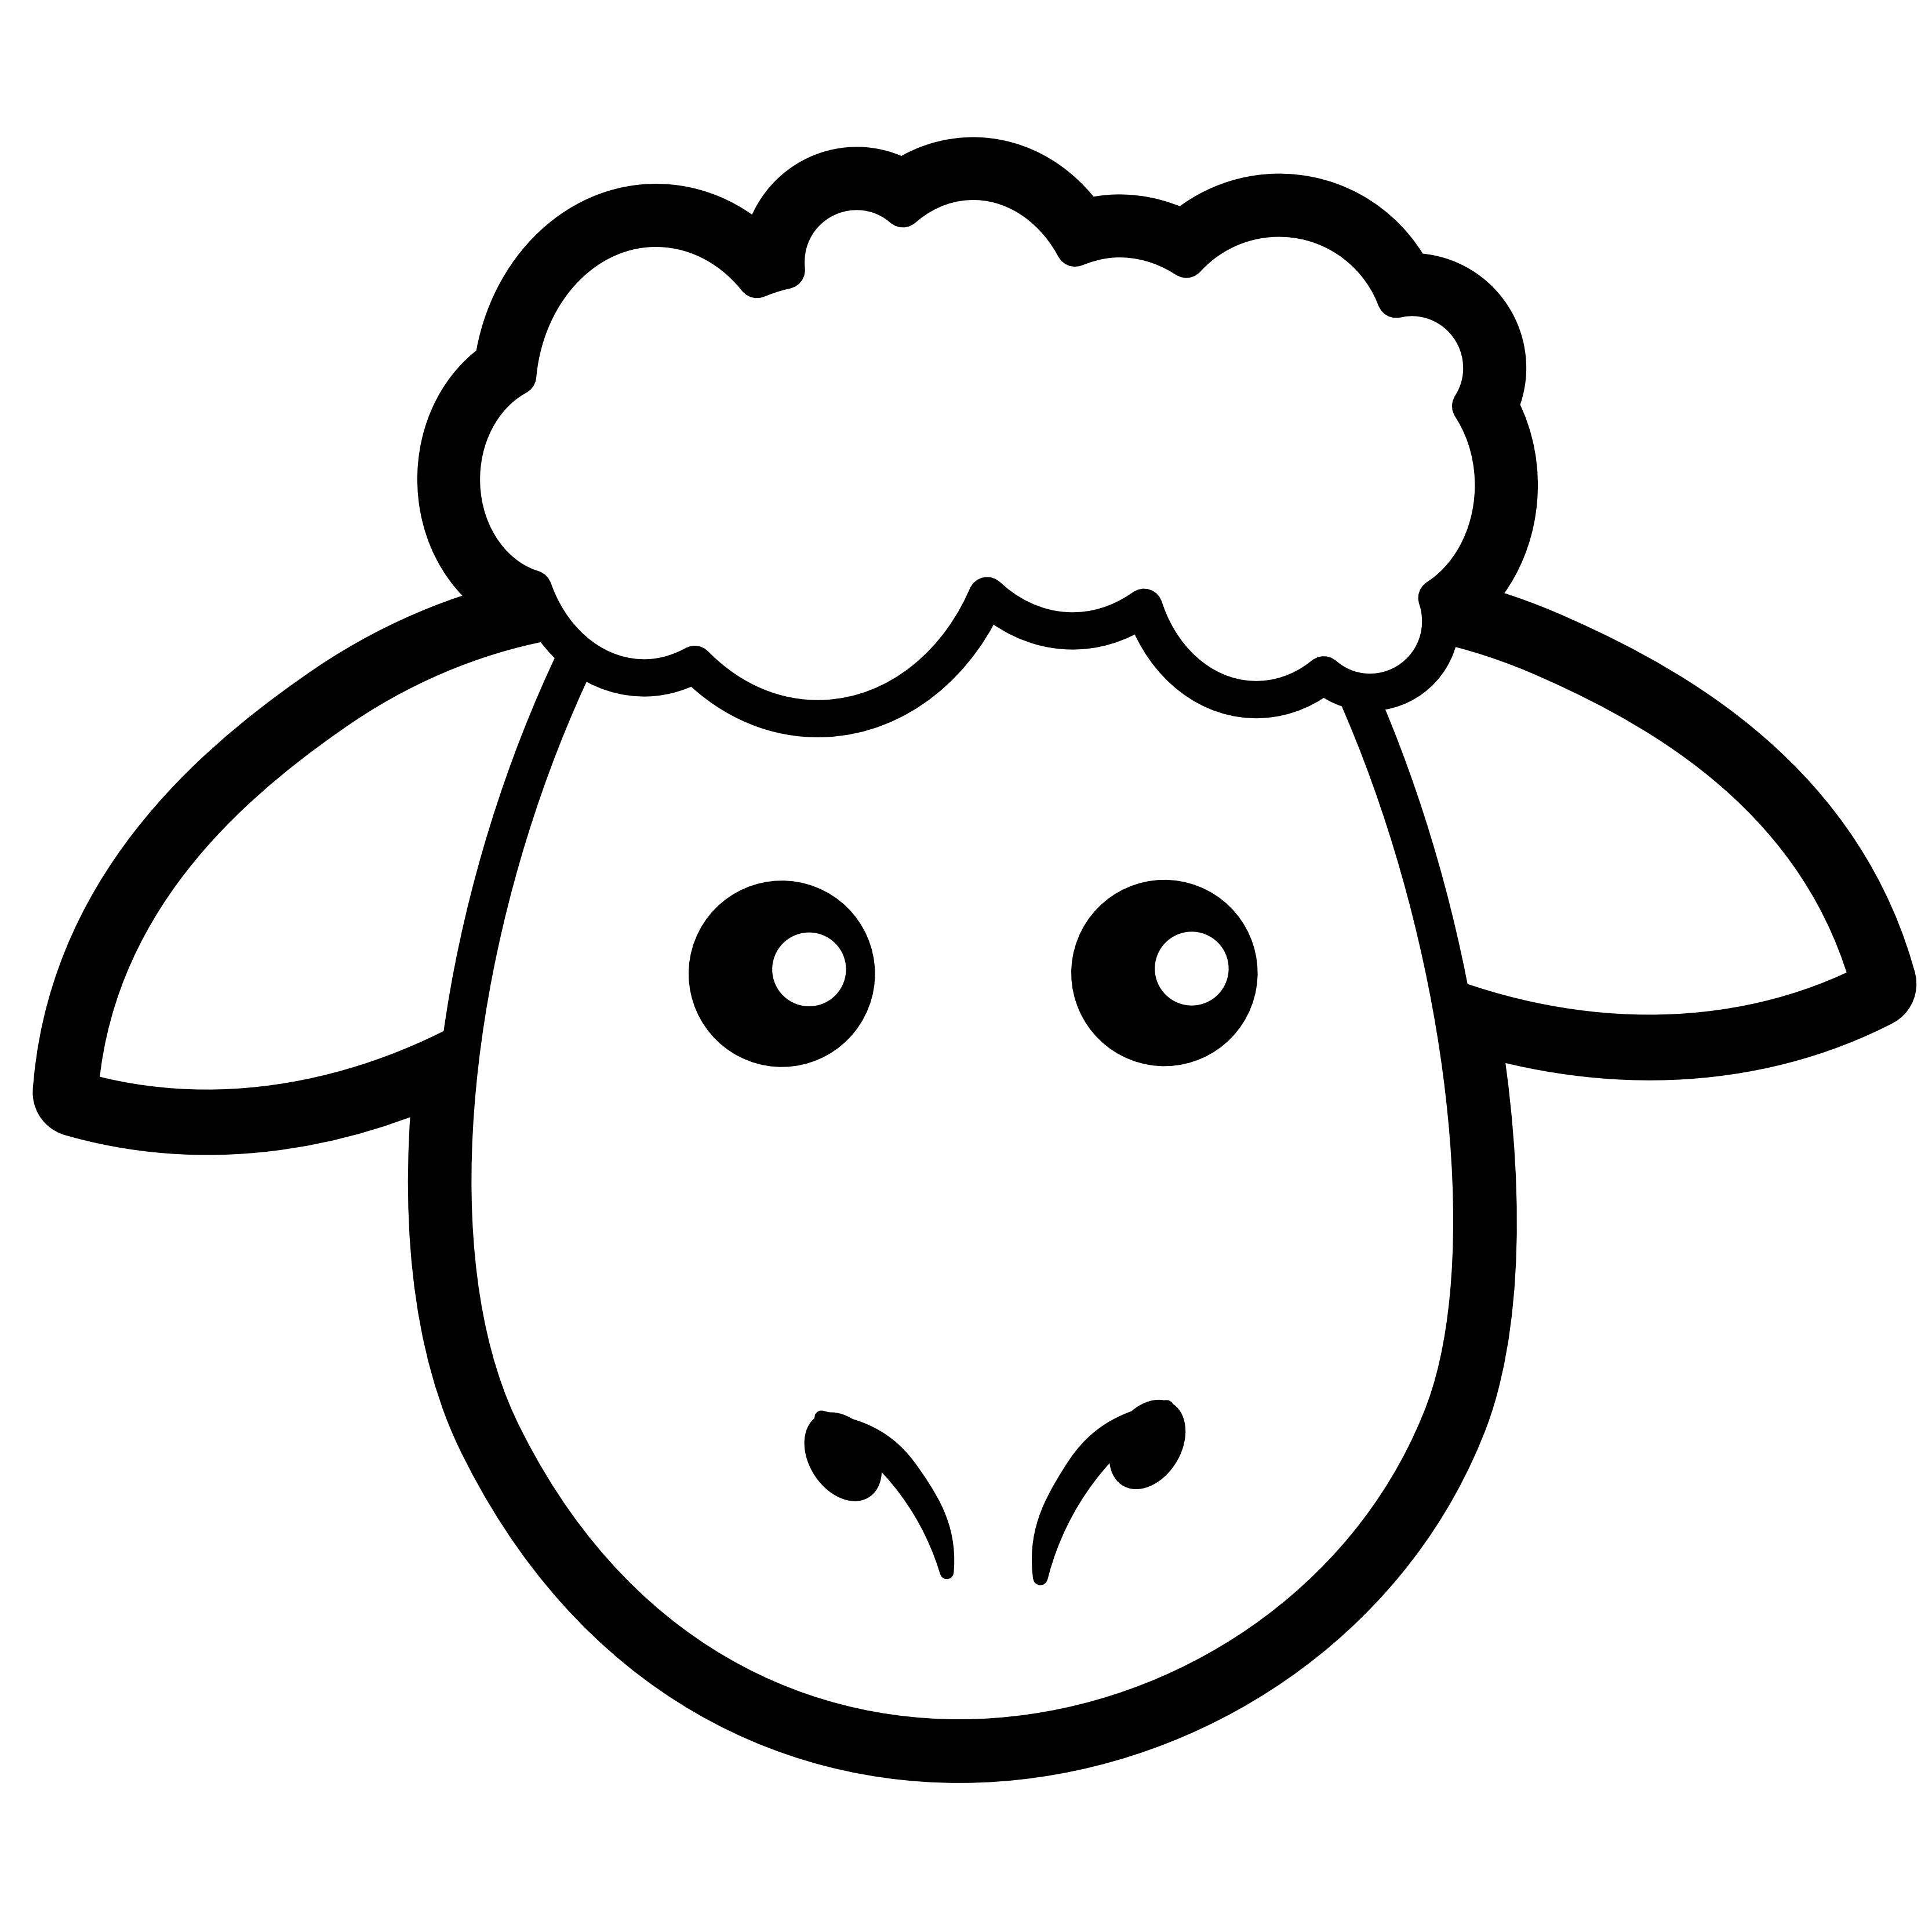 Cow head free download. I clipart sheep